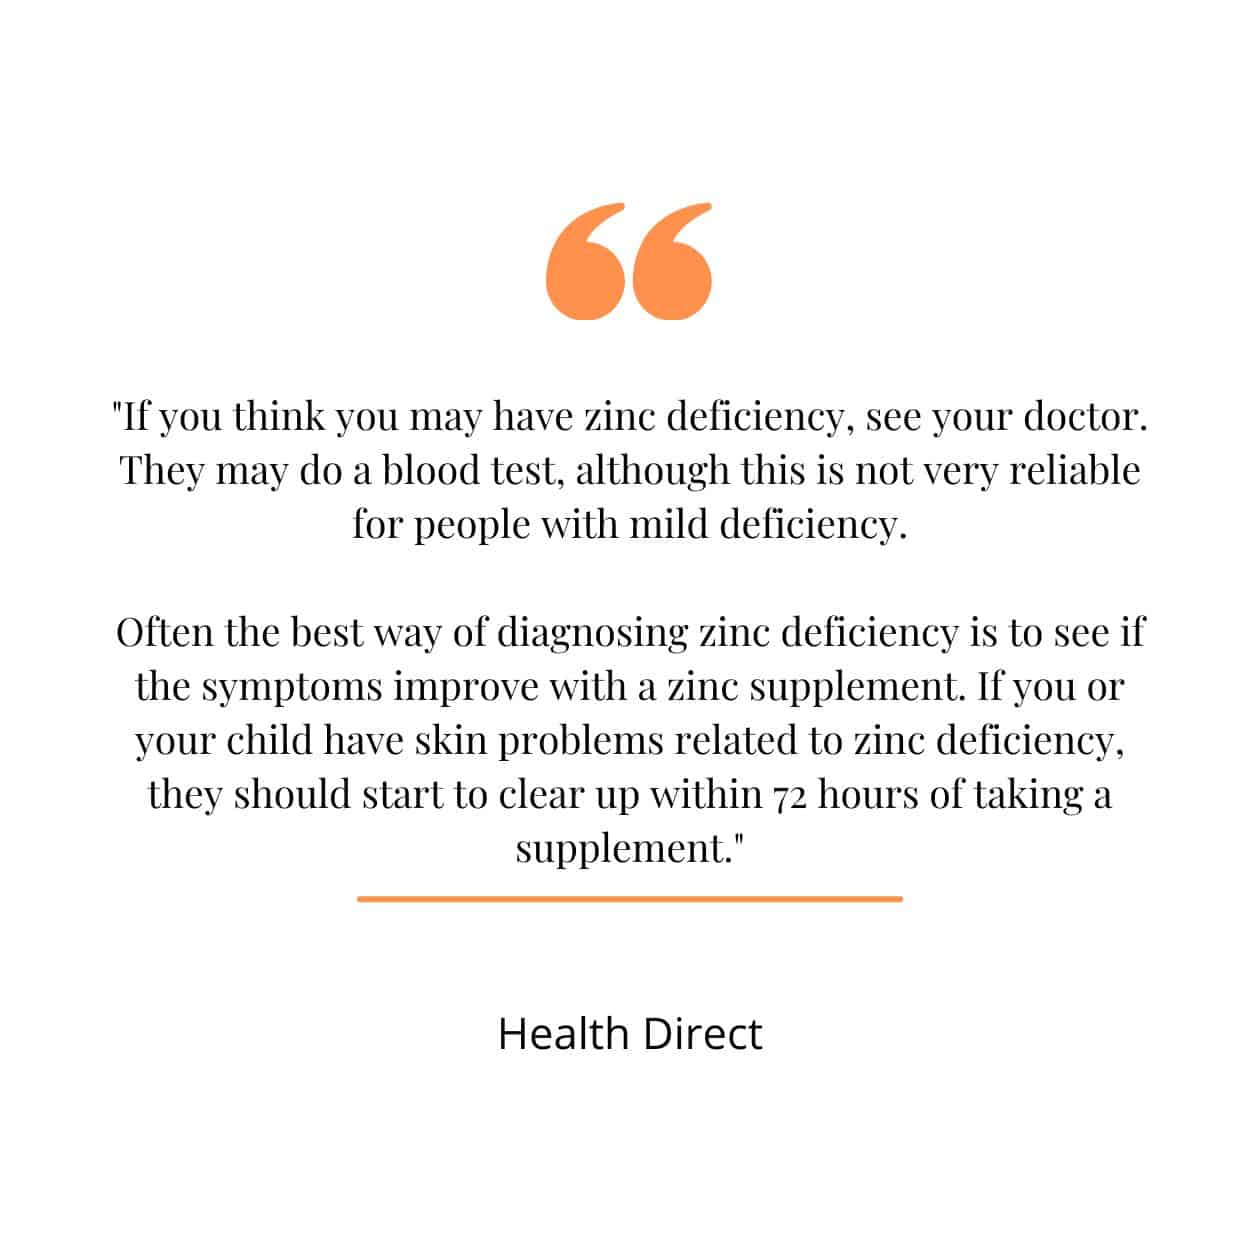 Zinc deficiency diagnosis quote from Health Direct AU.